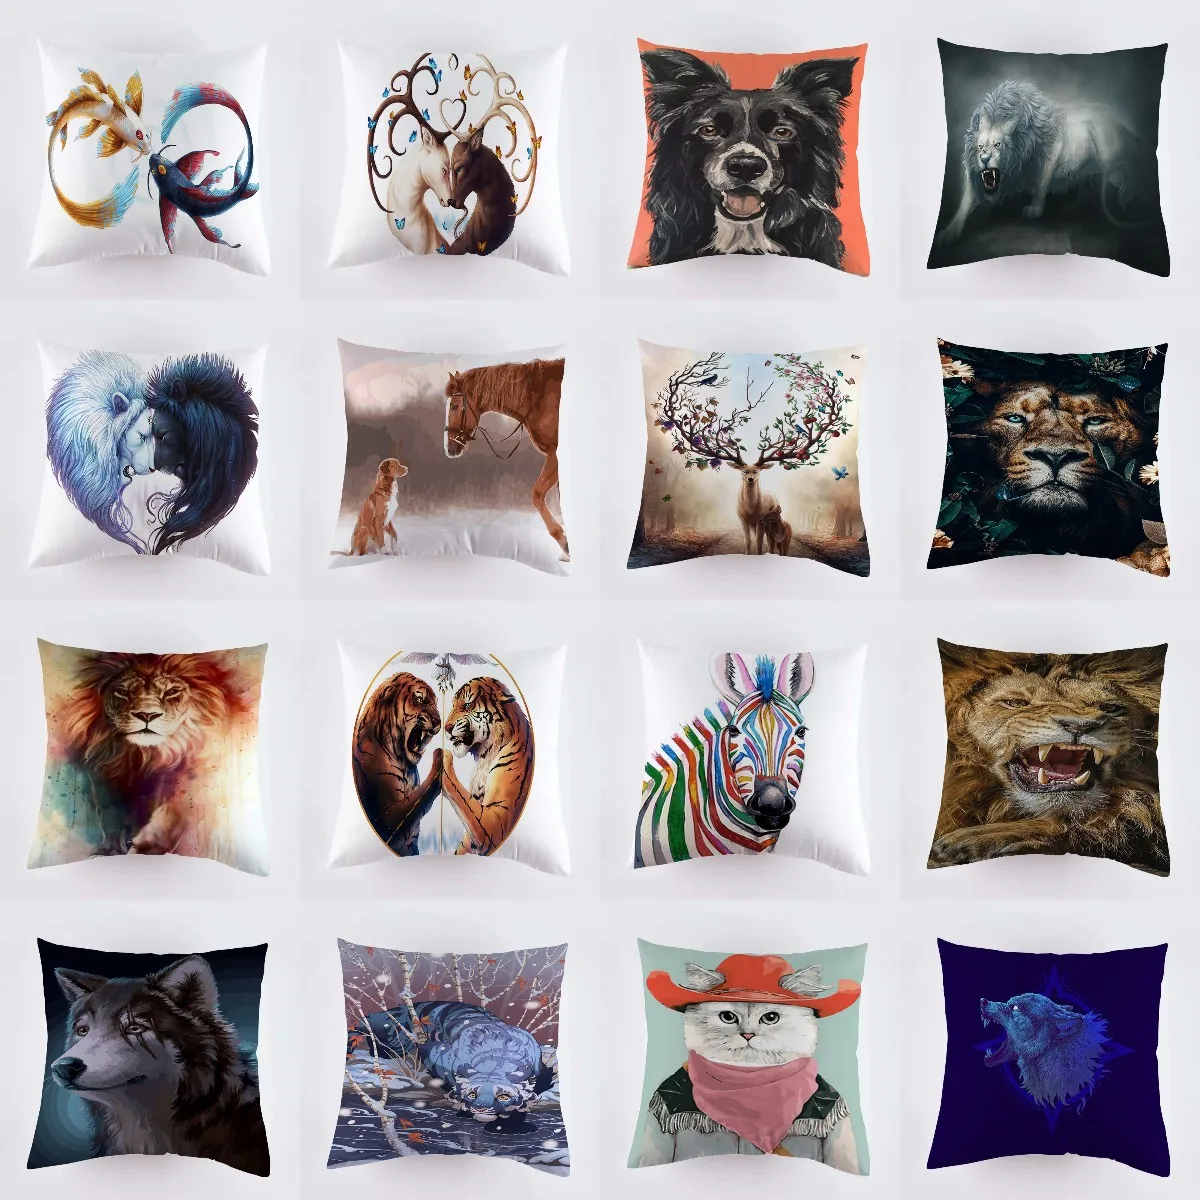 Decorative Painted Animals Pillowcase Polyester Square Cushion Cover Throw Pillows Bed Couch Home Decor Dakimakura